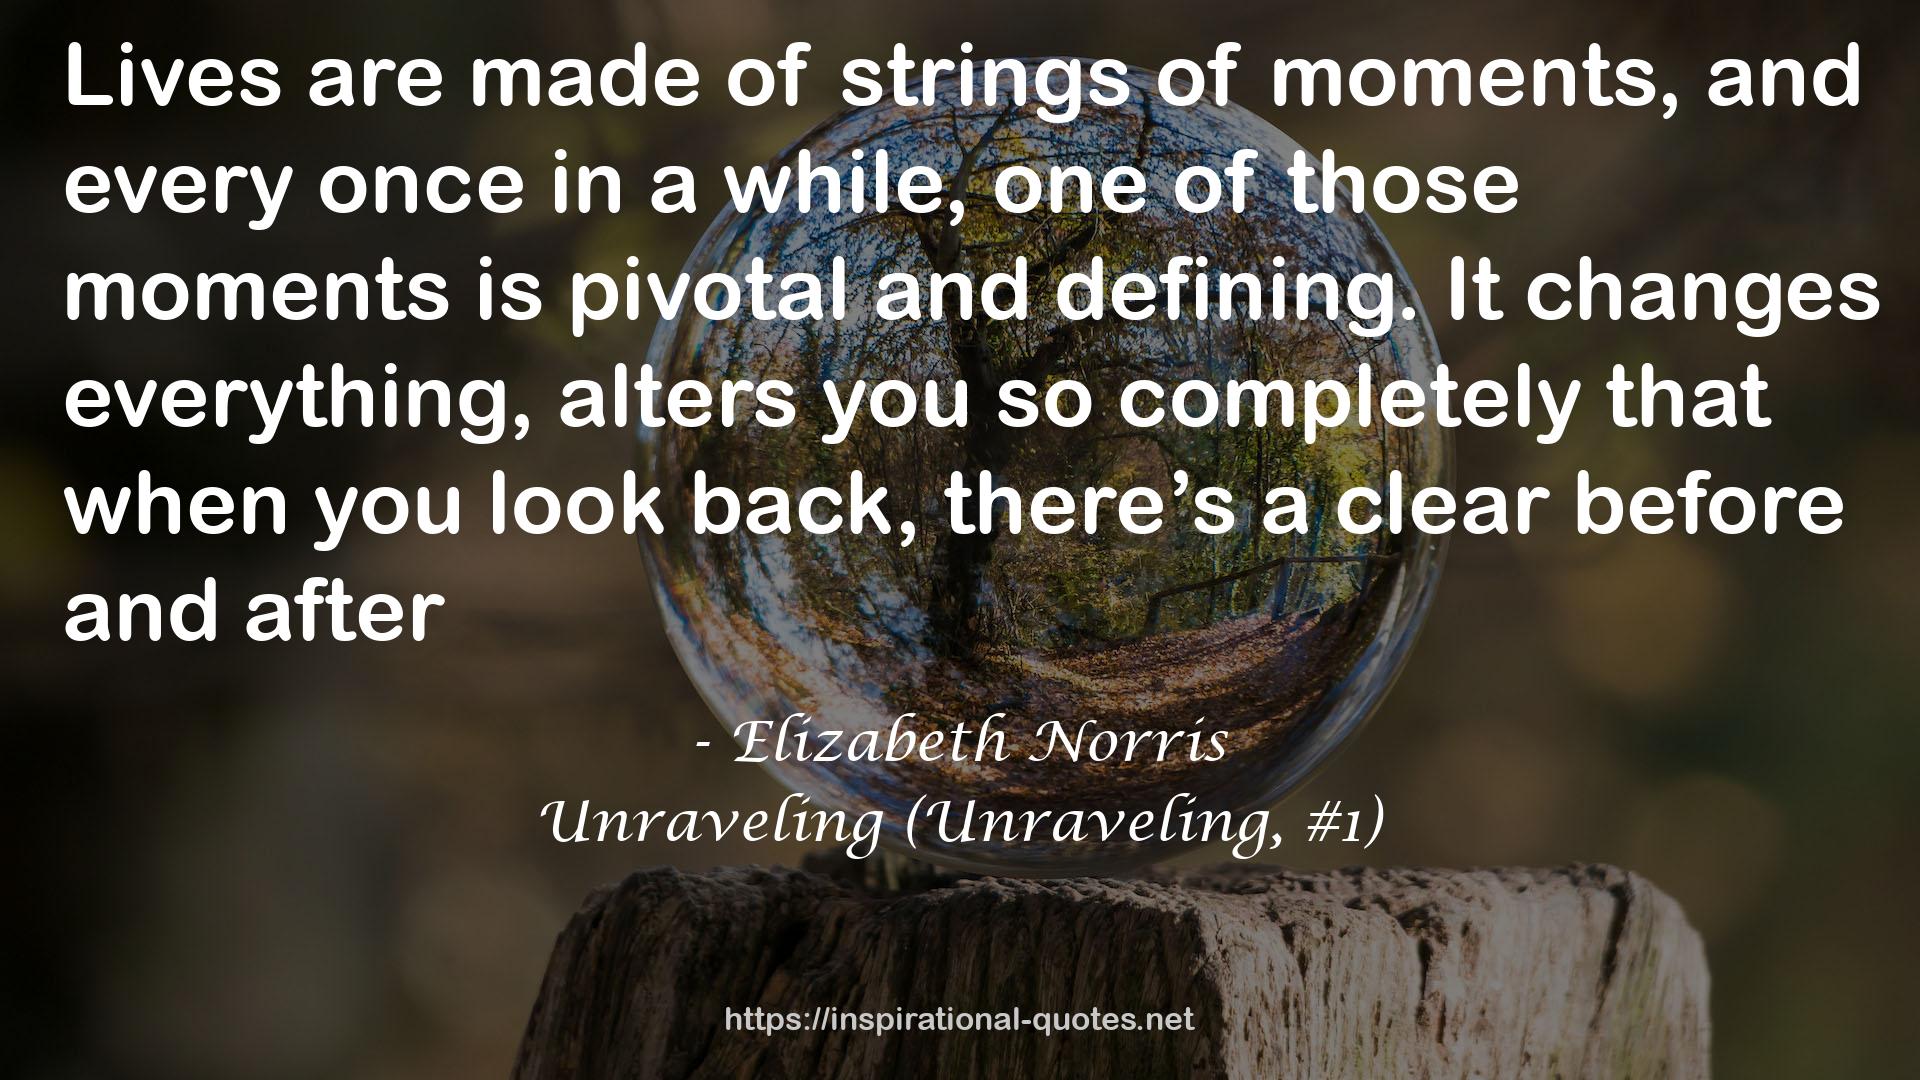 Unraveling (Unraveling, #1) QUOTES